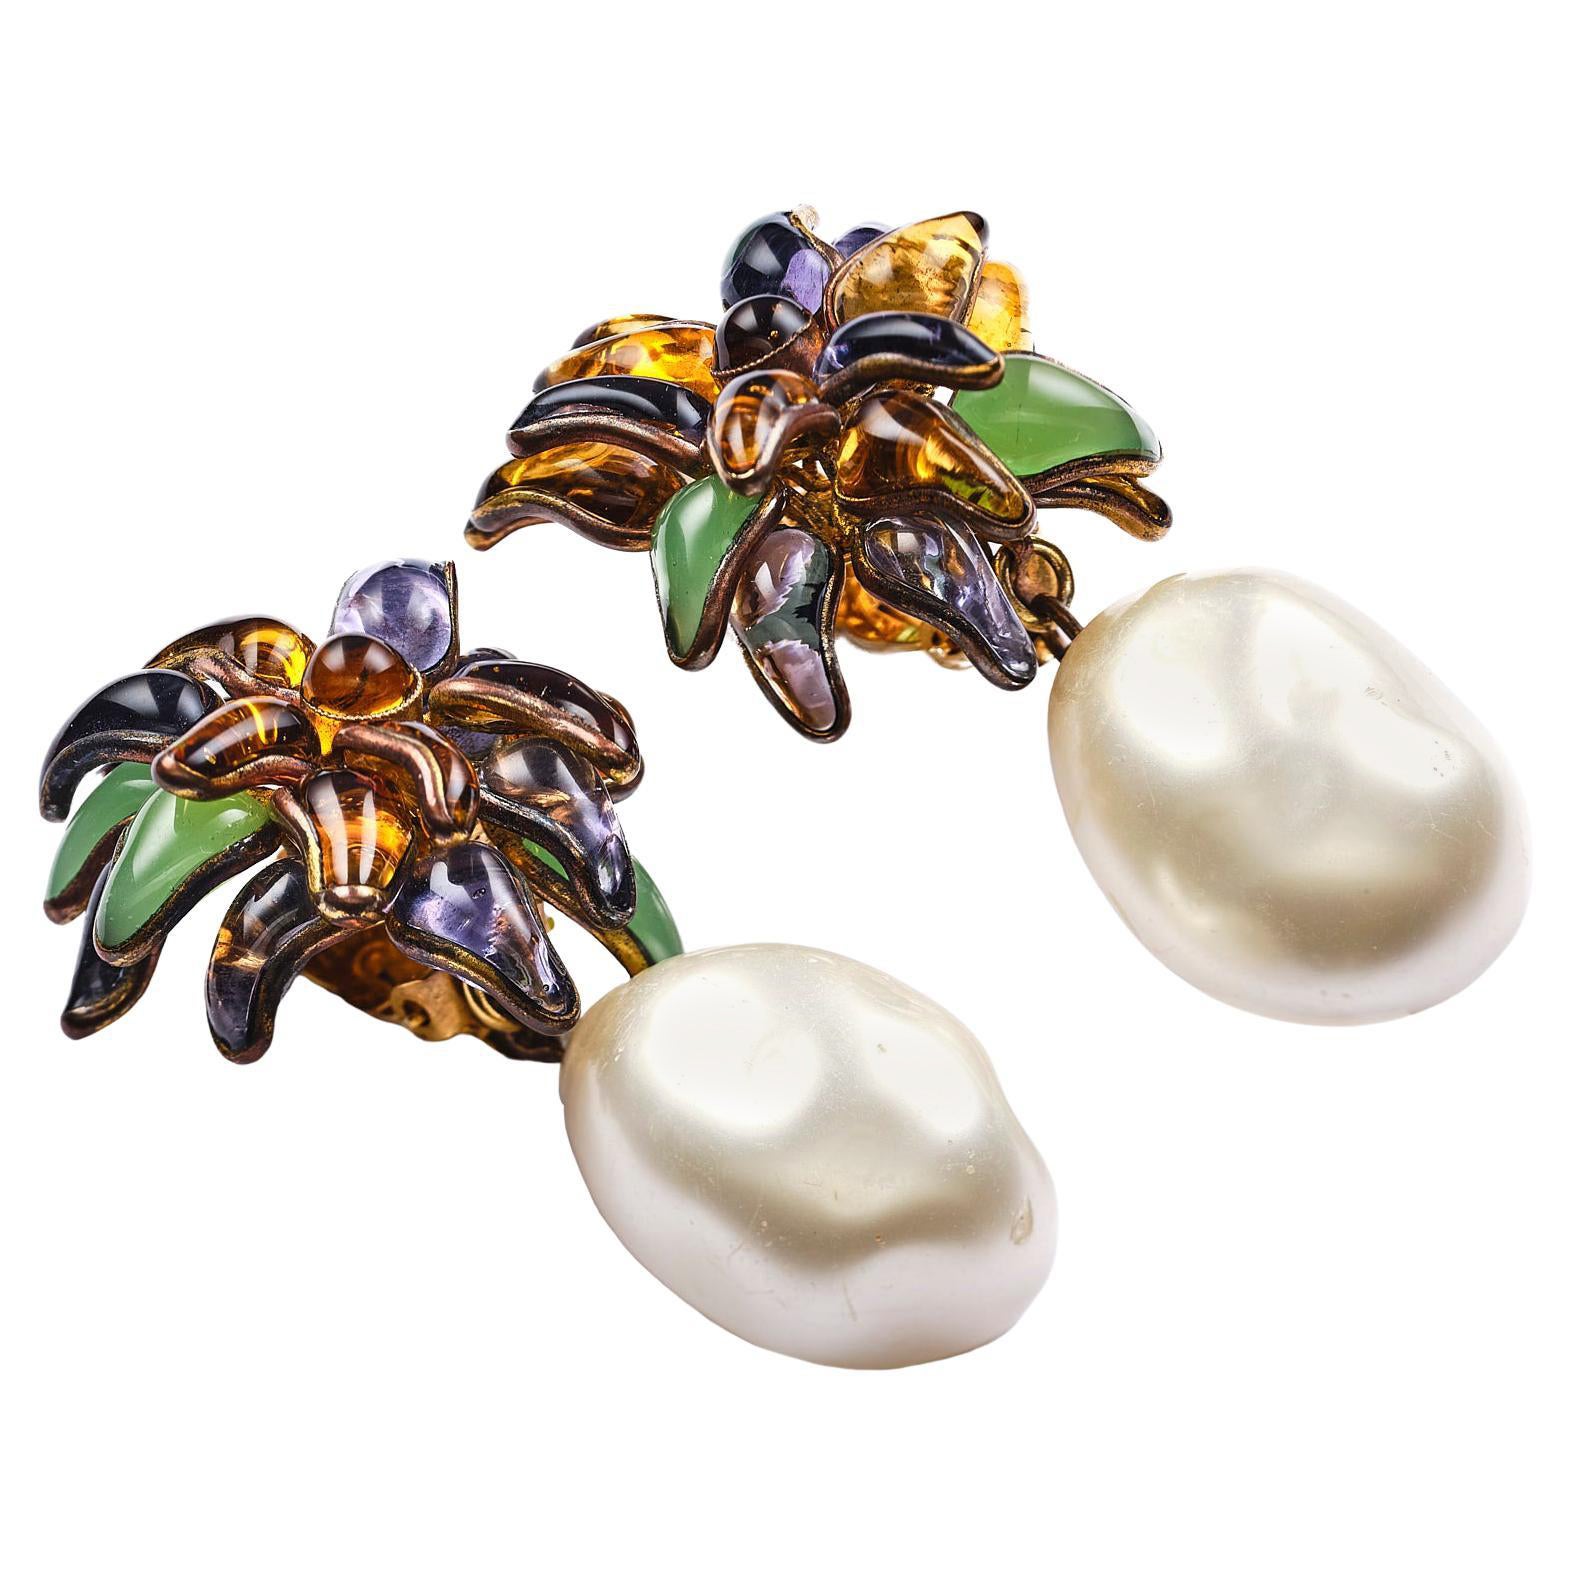 An extraordinary ear clip designed by Victoire de Castellane for Chanel in 1984. The flower is handmade of pured liquid glass with 17 small leaves in four different colors: purple, mint, yellow and brown. On the flower hangs a fantastic and huge